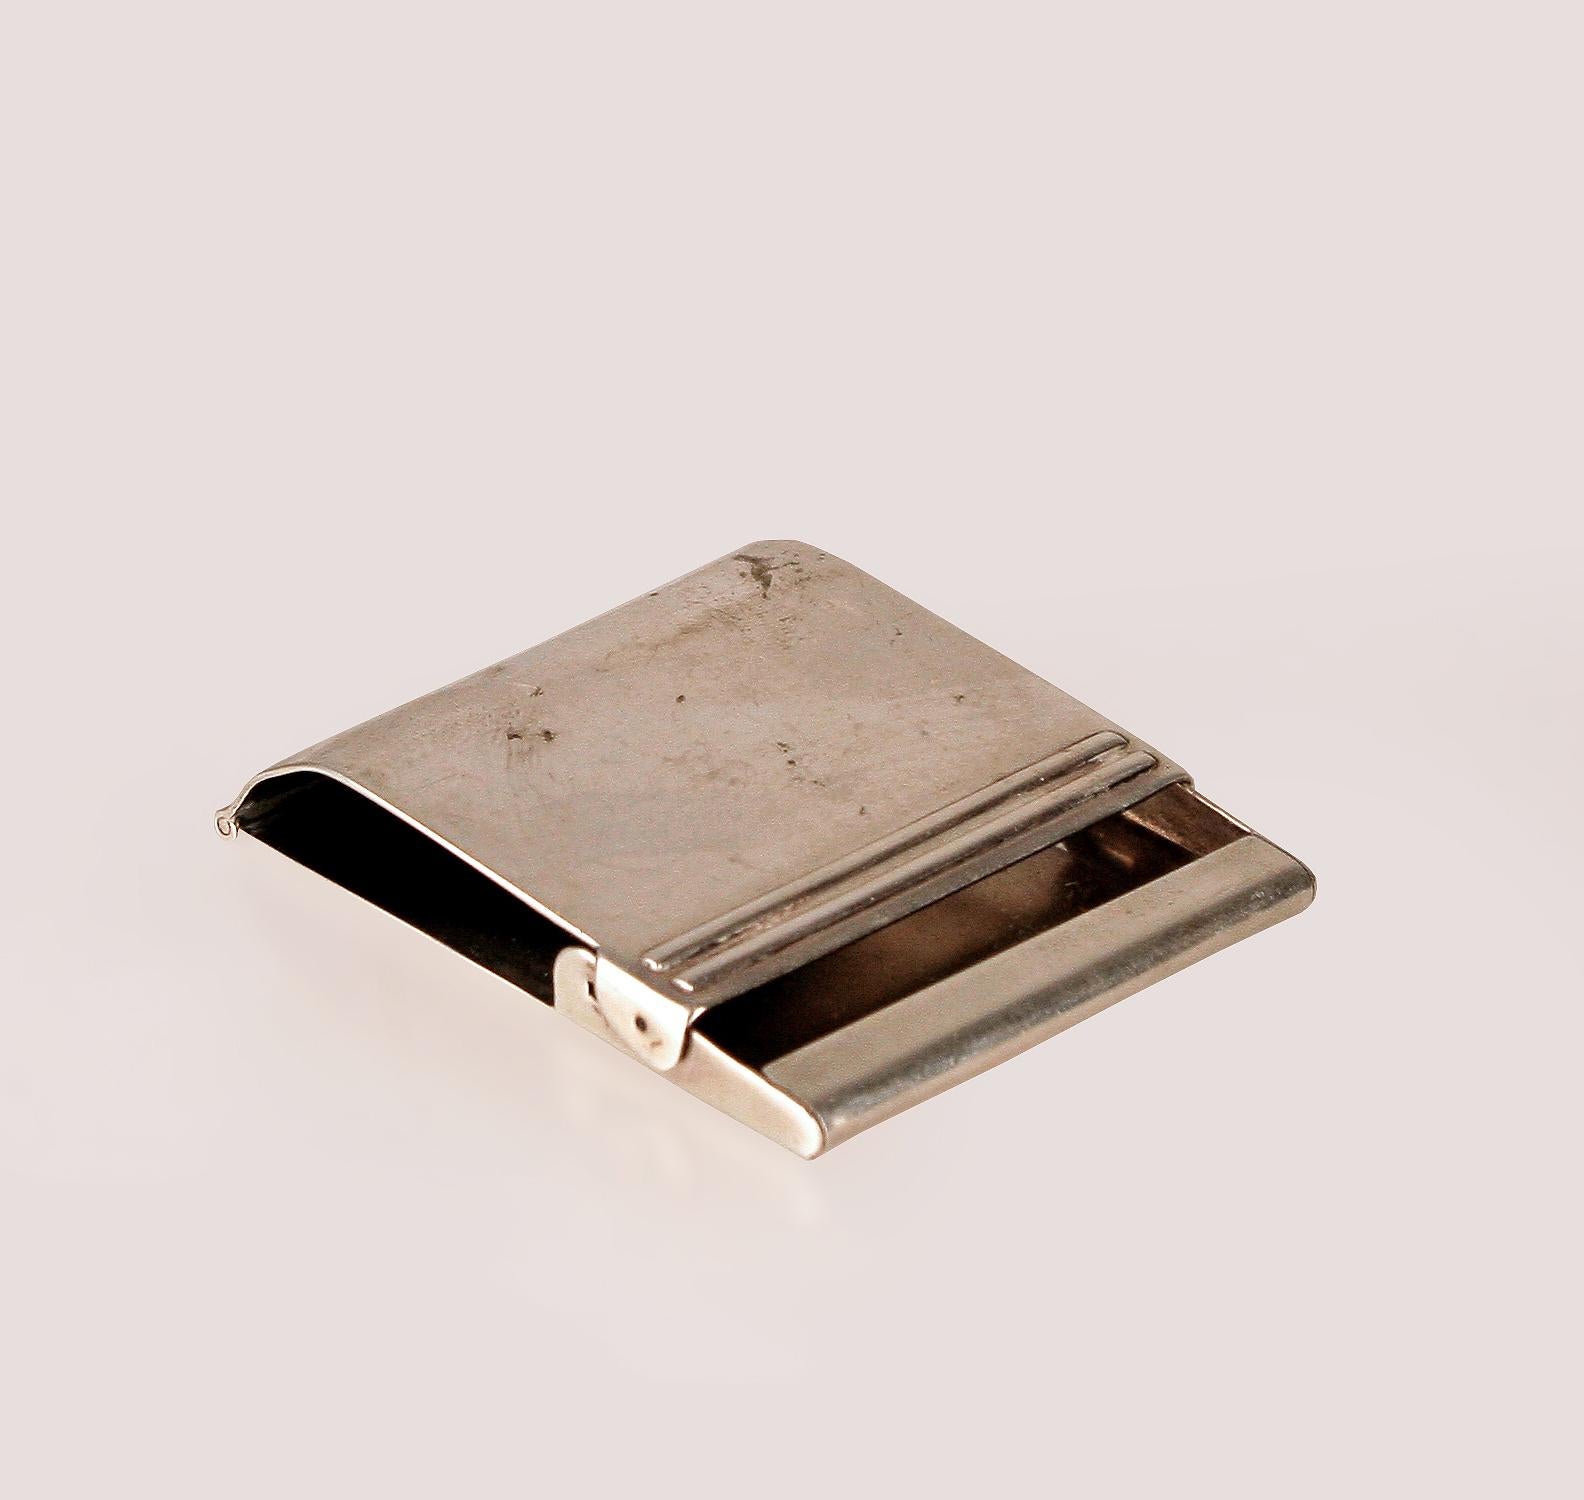 Mid-20th century american cased sterling silver flip matchbook cover/match holder by Tiffany & Co.

By: Tiffany & Co.
Material: metal, silver, silver plate, sterling silver
Technique: metalwork, plated, polished, silvered
Dimensions: 2 in x 2 in x